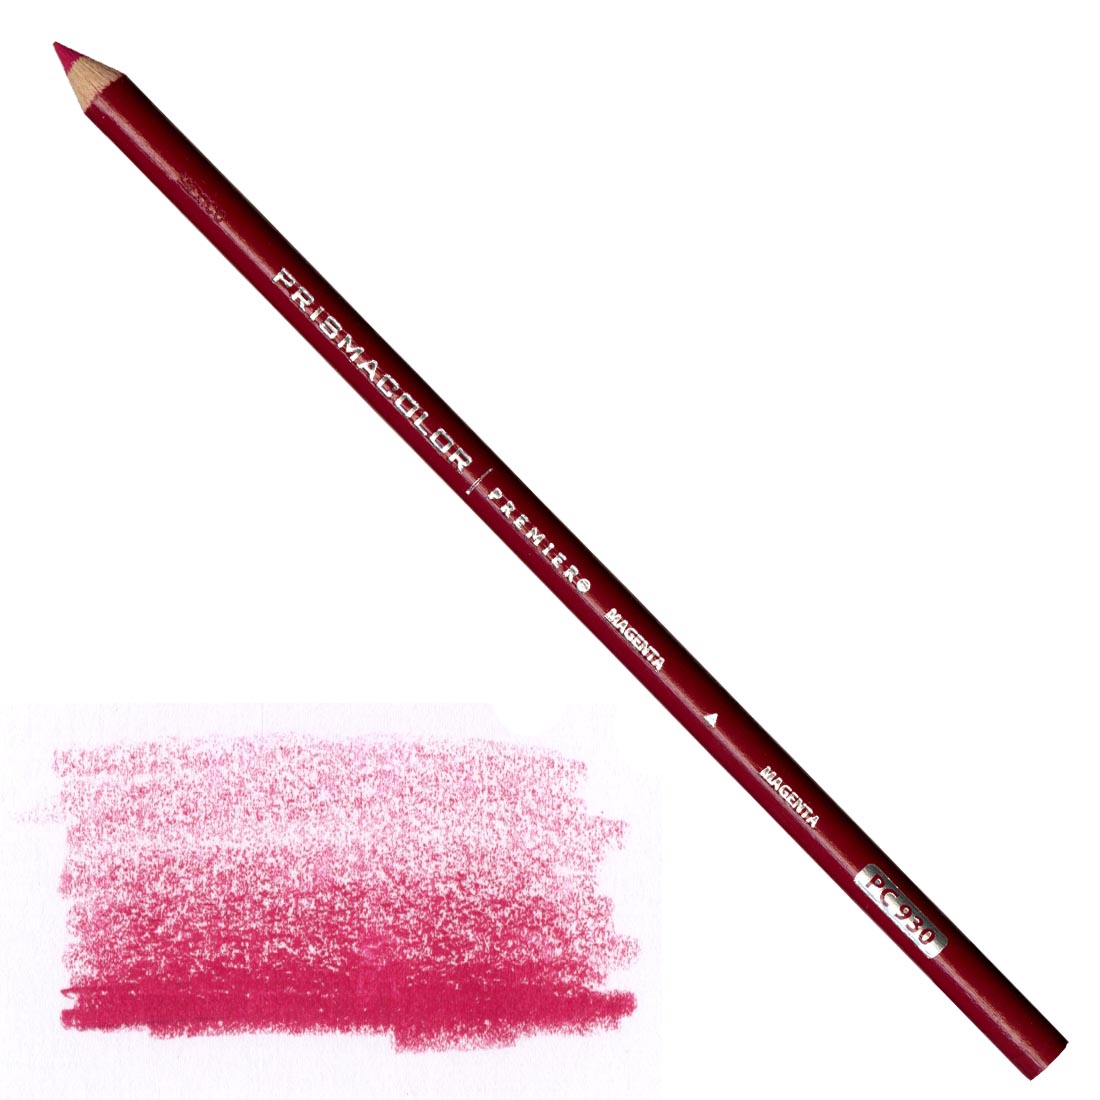 Magenta Prismacolor Premier Colored Pencil with a sample colored swatch